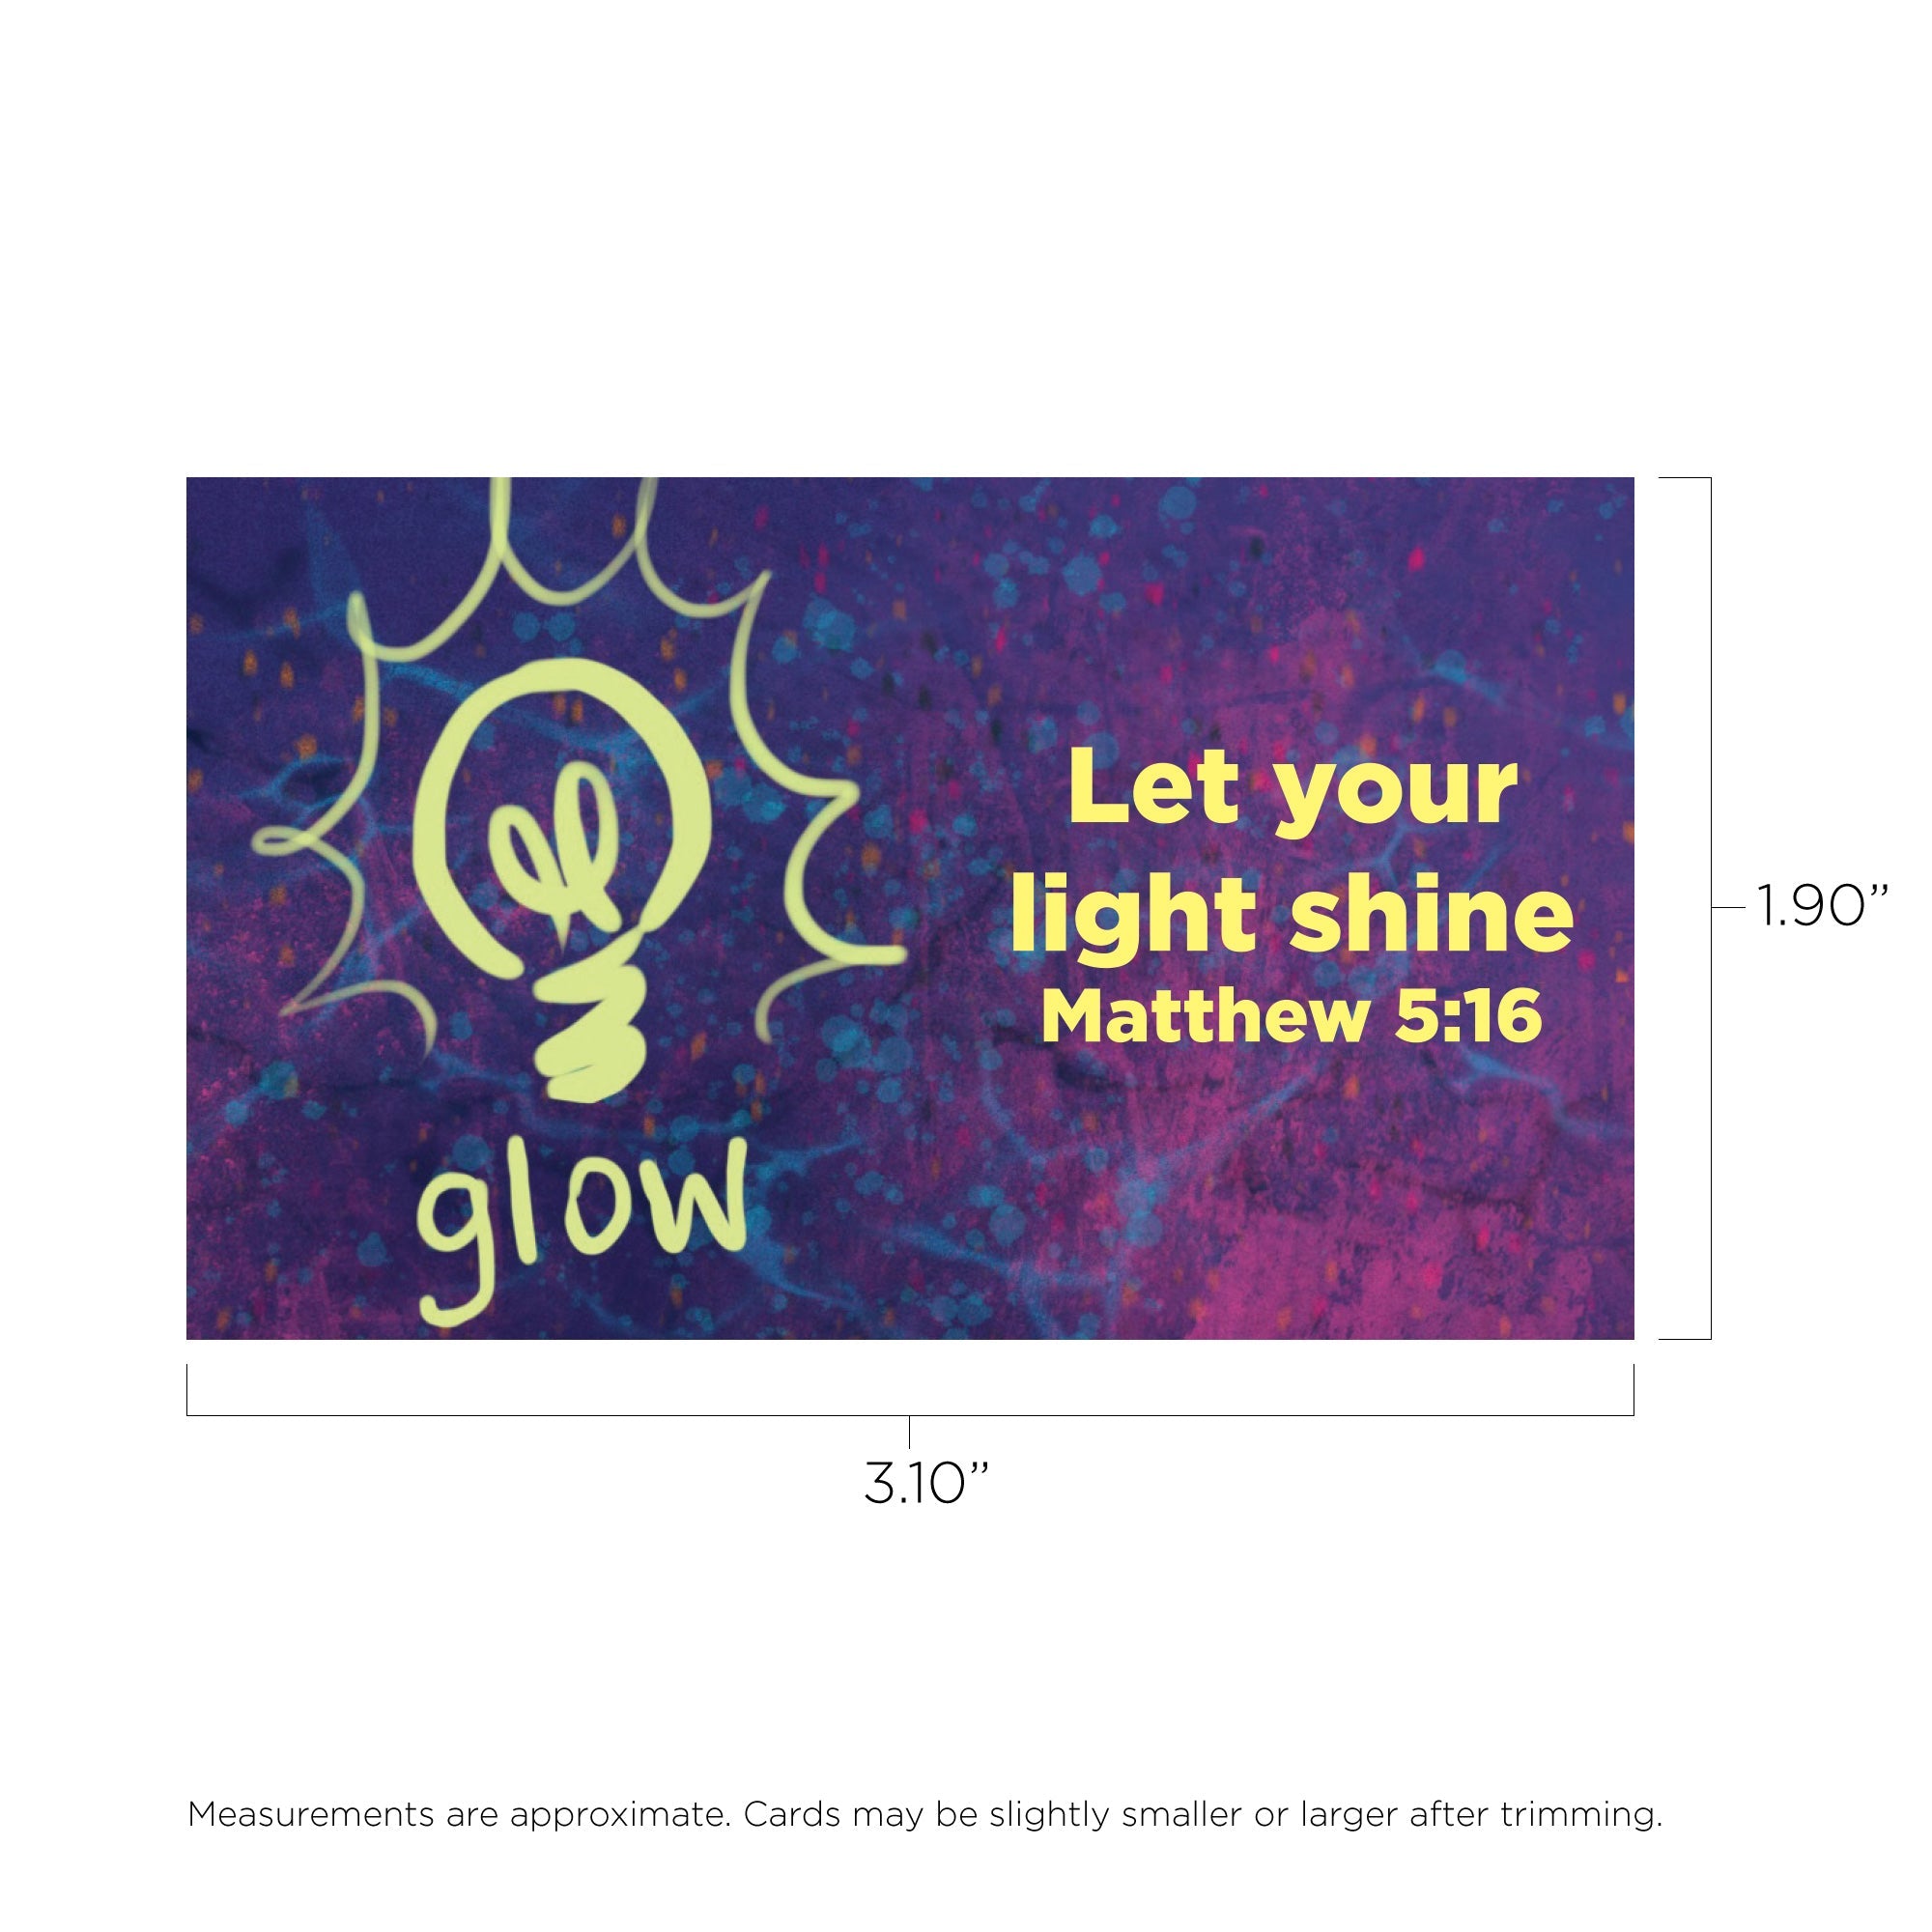 Children and Youth, Pass Along Scripture Cards, Glow, Matthew 5:16 Pack of 25